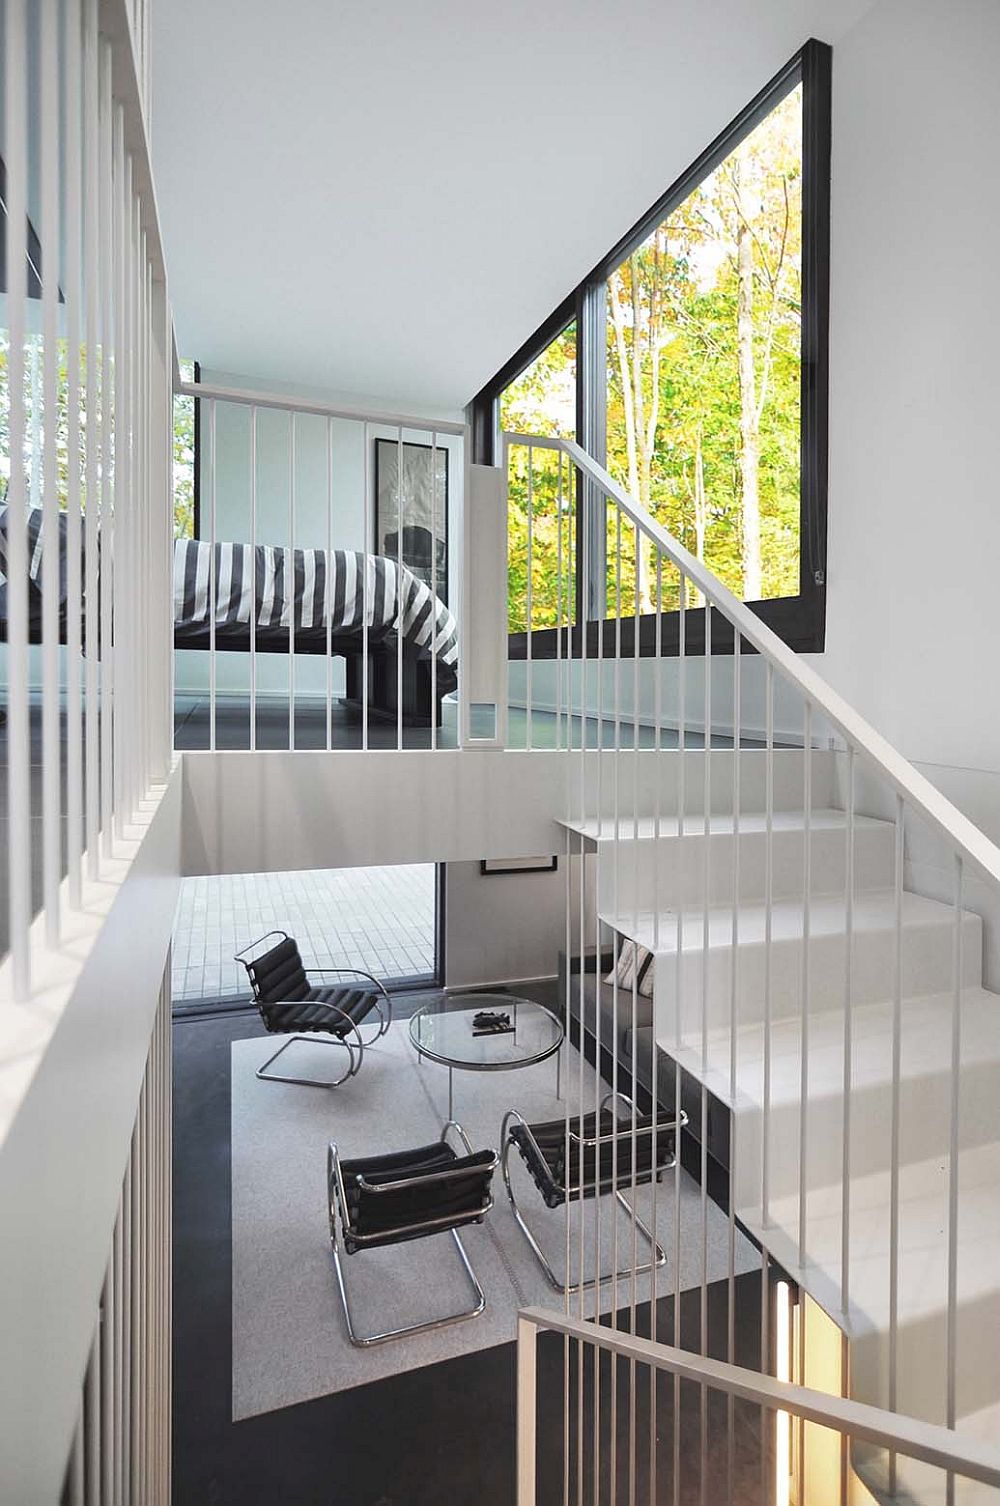 Delicate and sculptural staircase leads to the master bedroom on the top level overlooking the forest